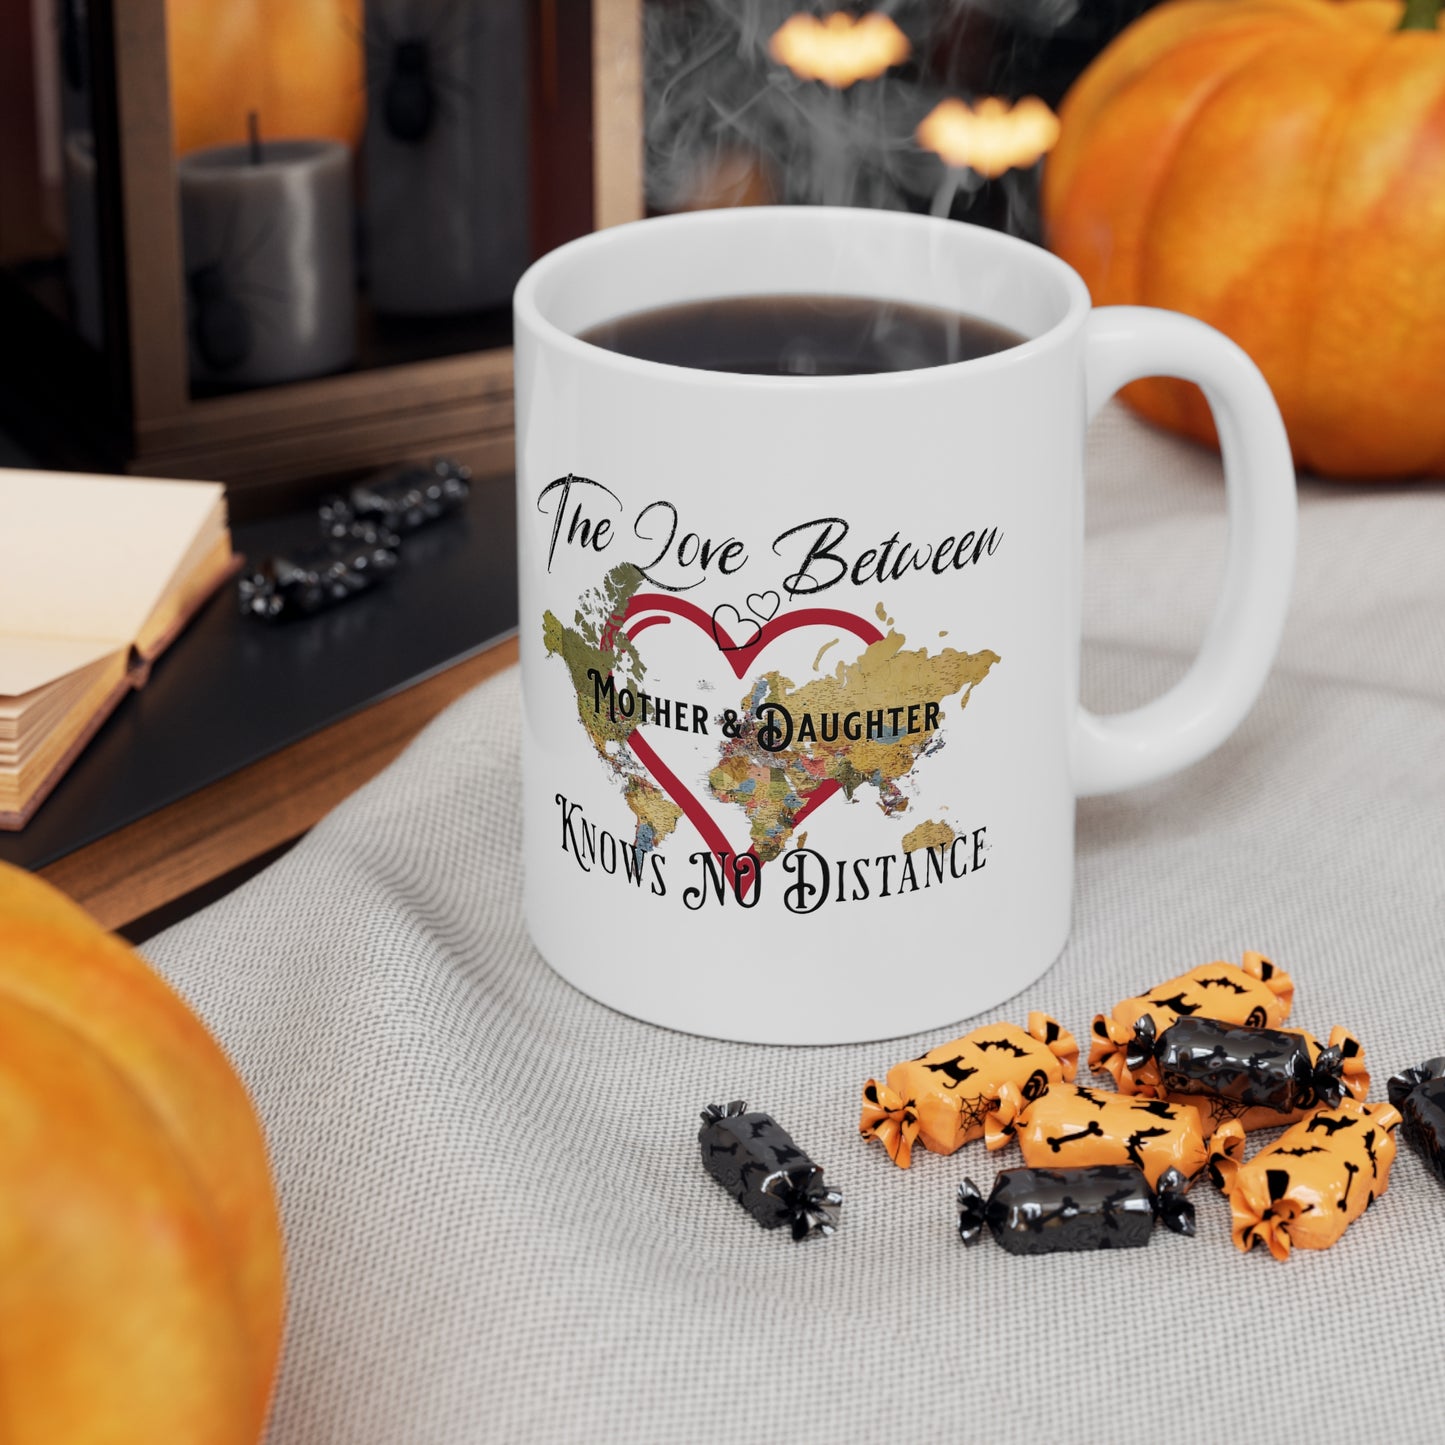 The love between mother and daughter knows no distance - Ceramic Mug 11oz